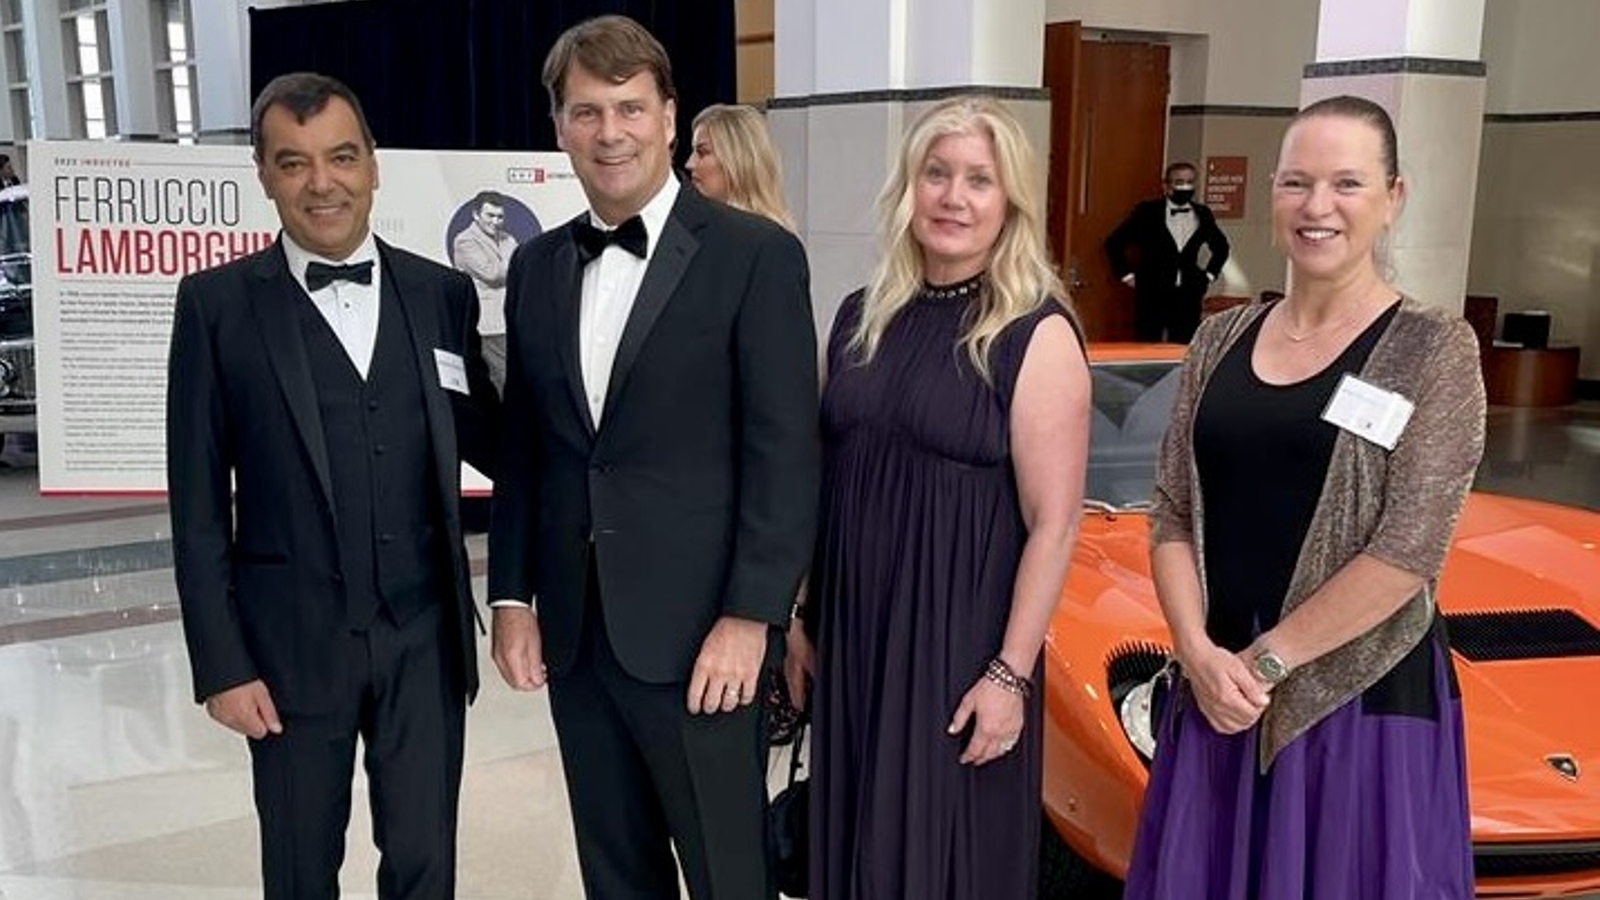 Mobileye founder-CEO Amnon Shashua, far left, and his wife, Anat, far right, flank Ford CEO Jim Farley and his wife, Lia. Photo courtesy of Mobileye